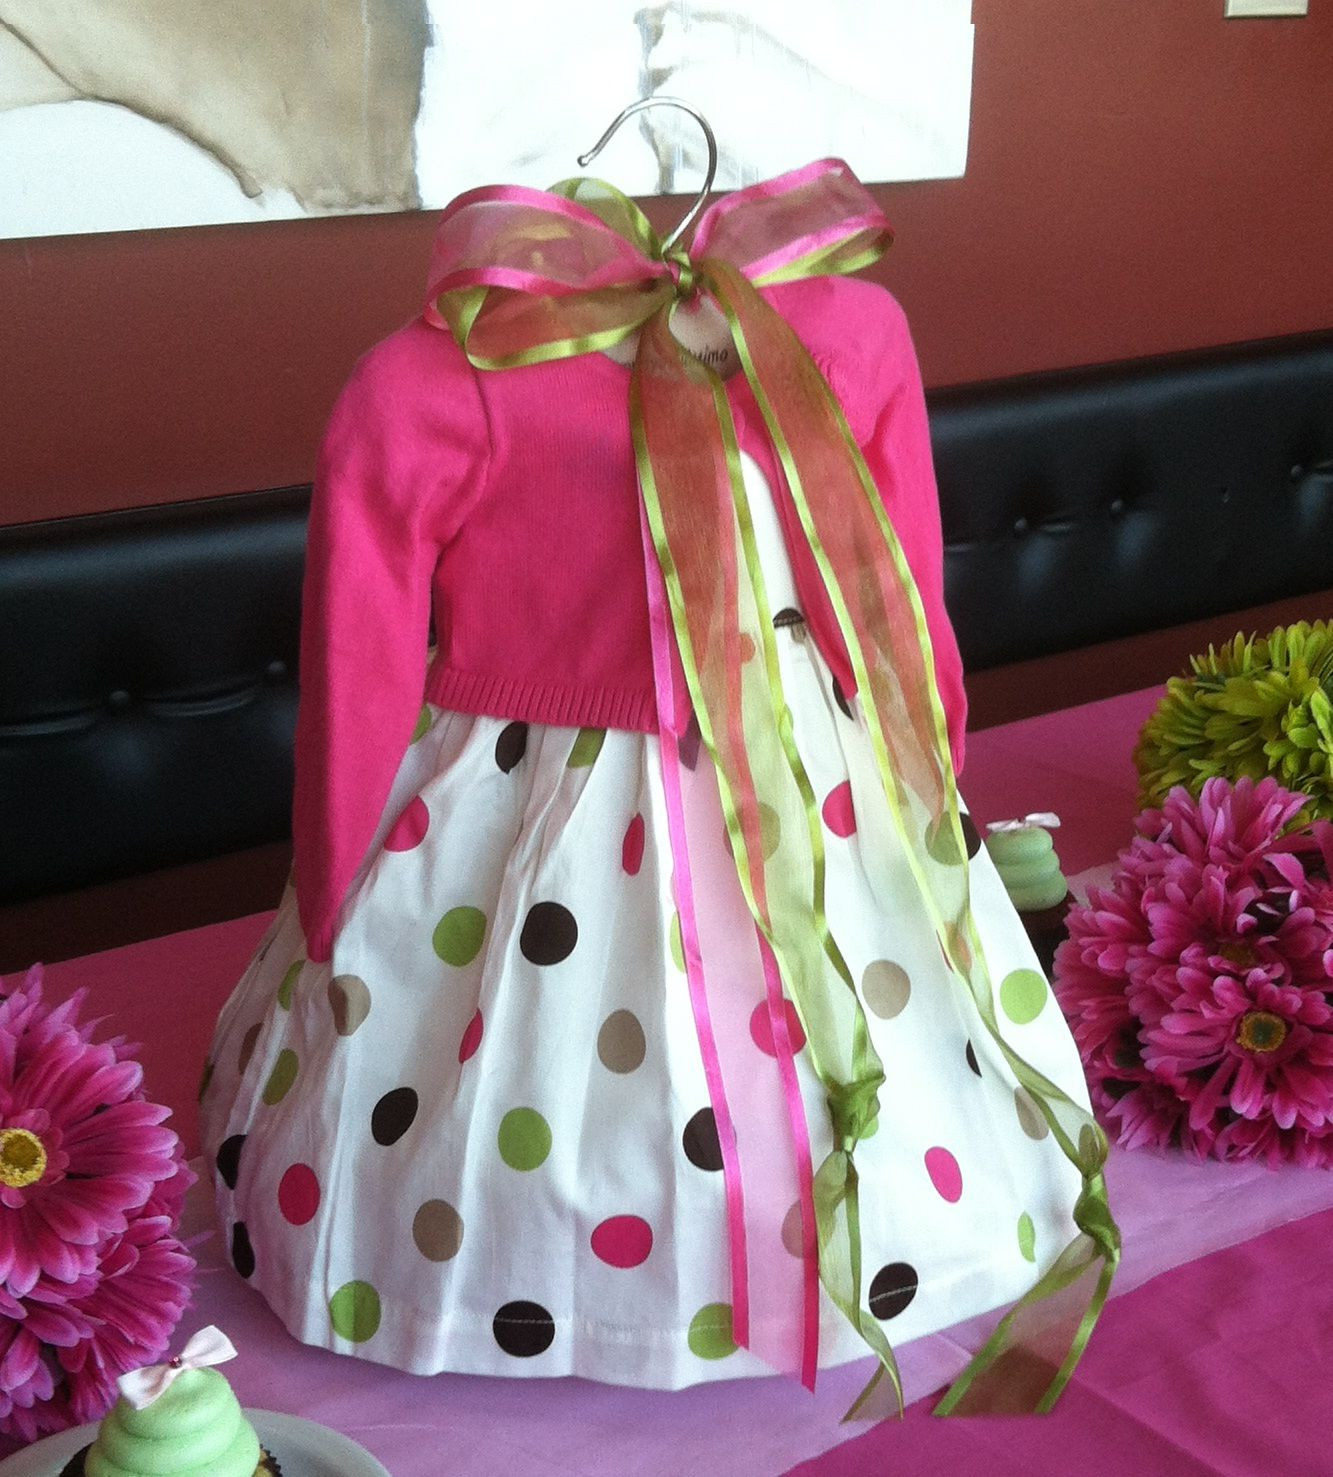 Baby Shower Dress Ideas
 Use a baby dress as the centerpiece for a girl baby shower